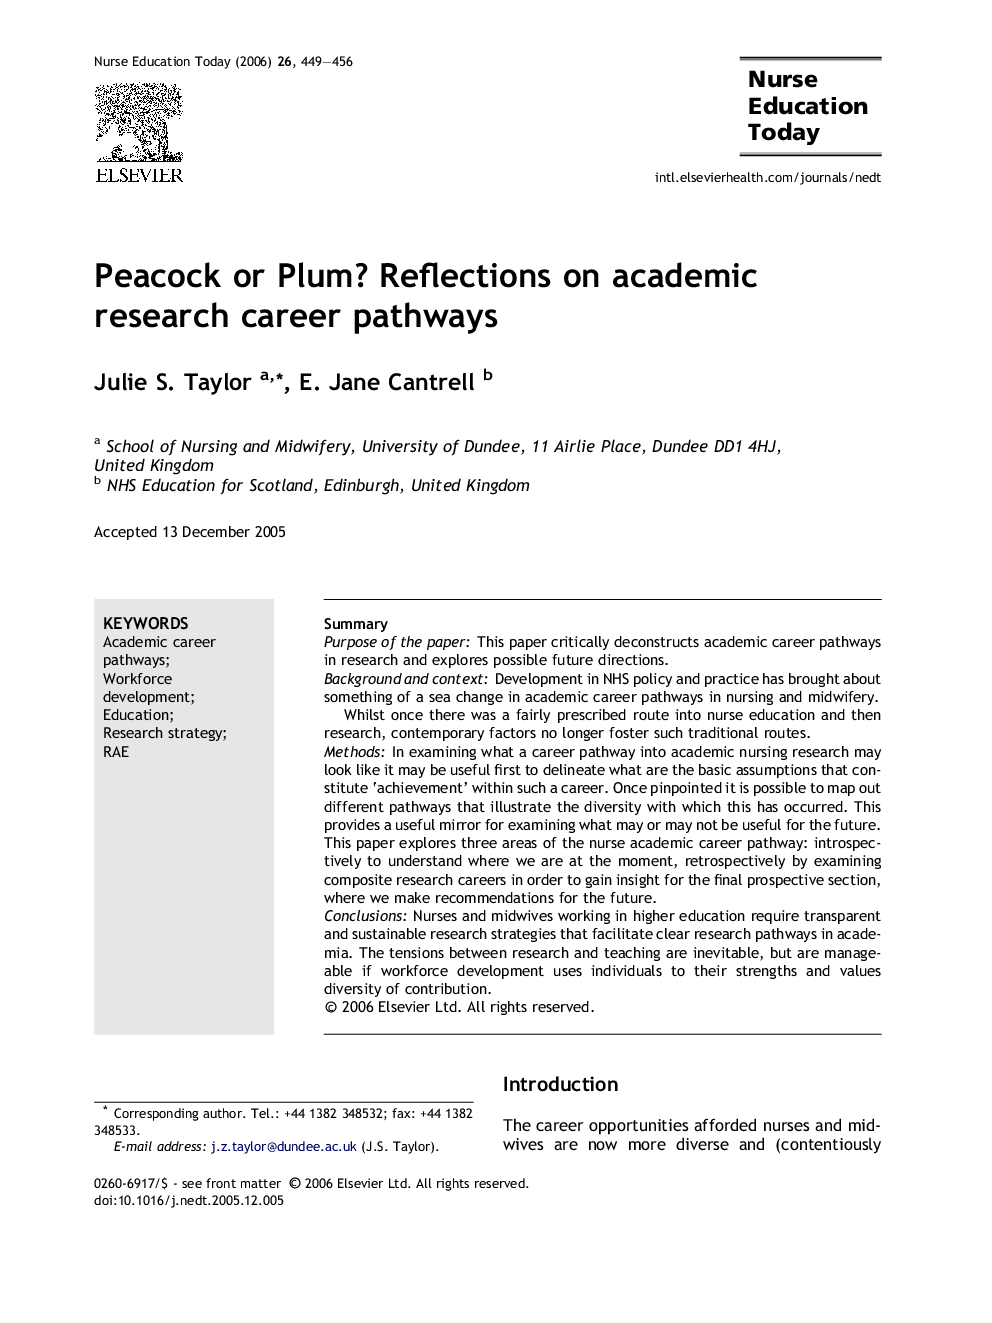 Peacock or Plum? Reflections on academic research career pathways